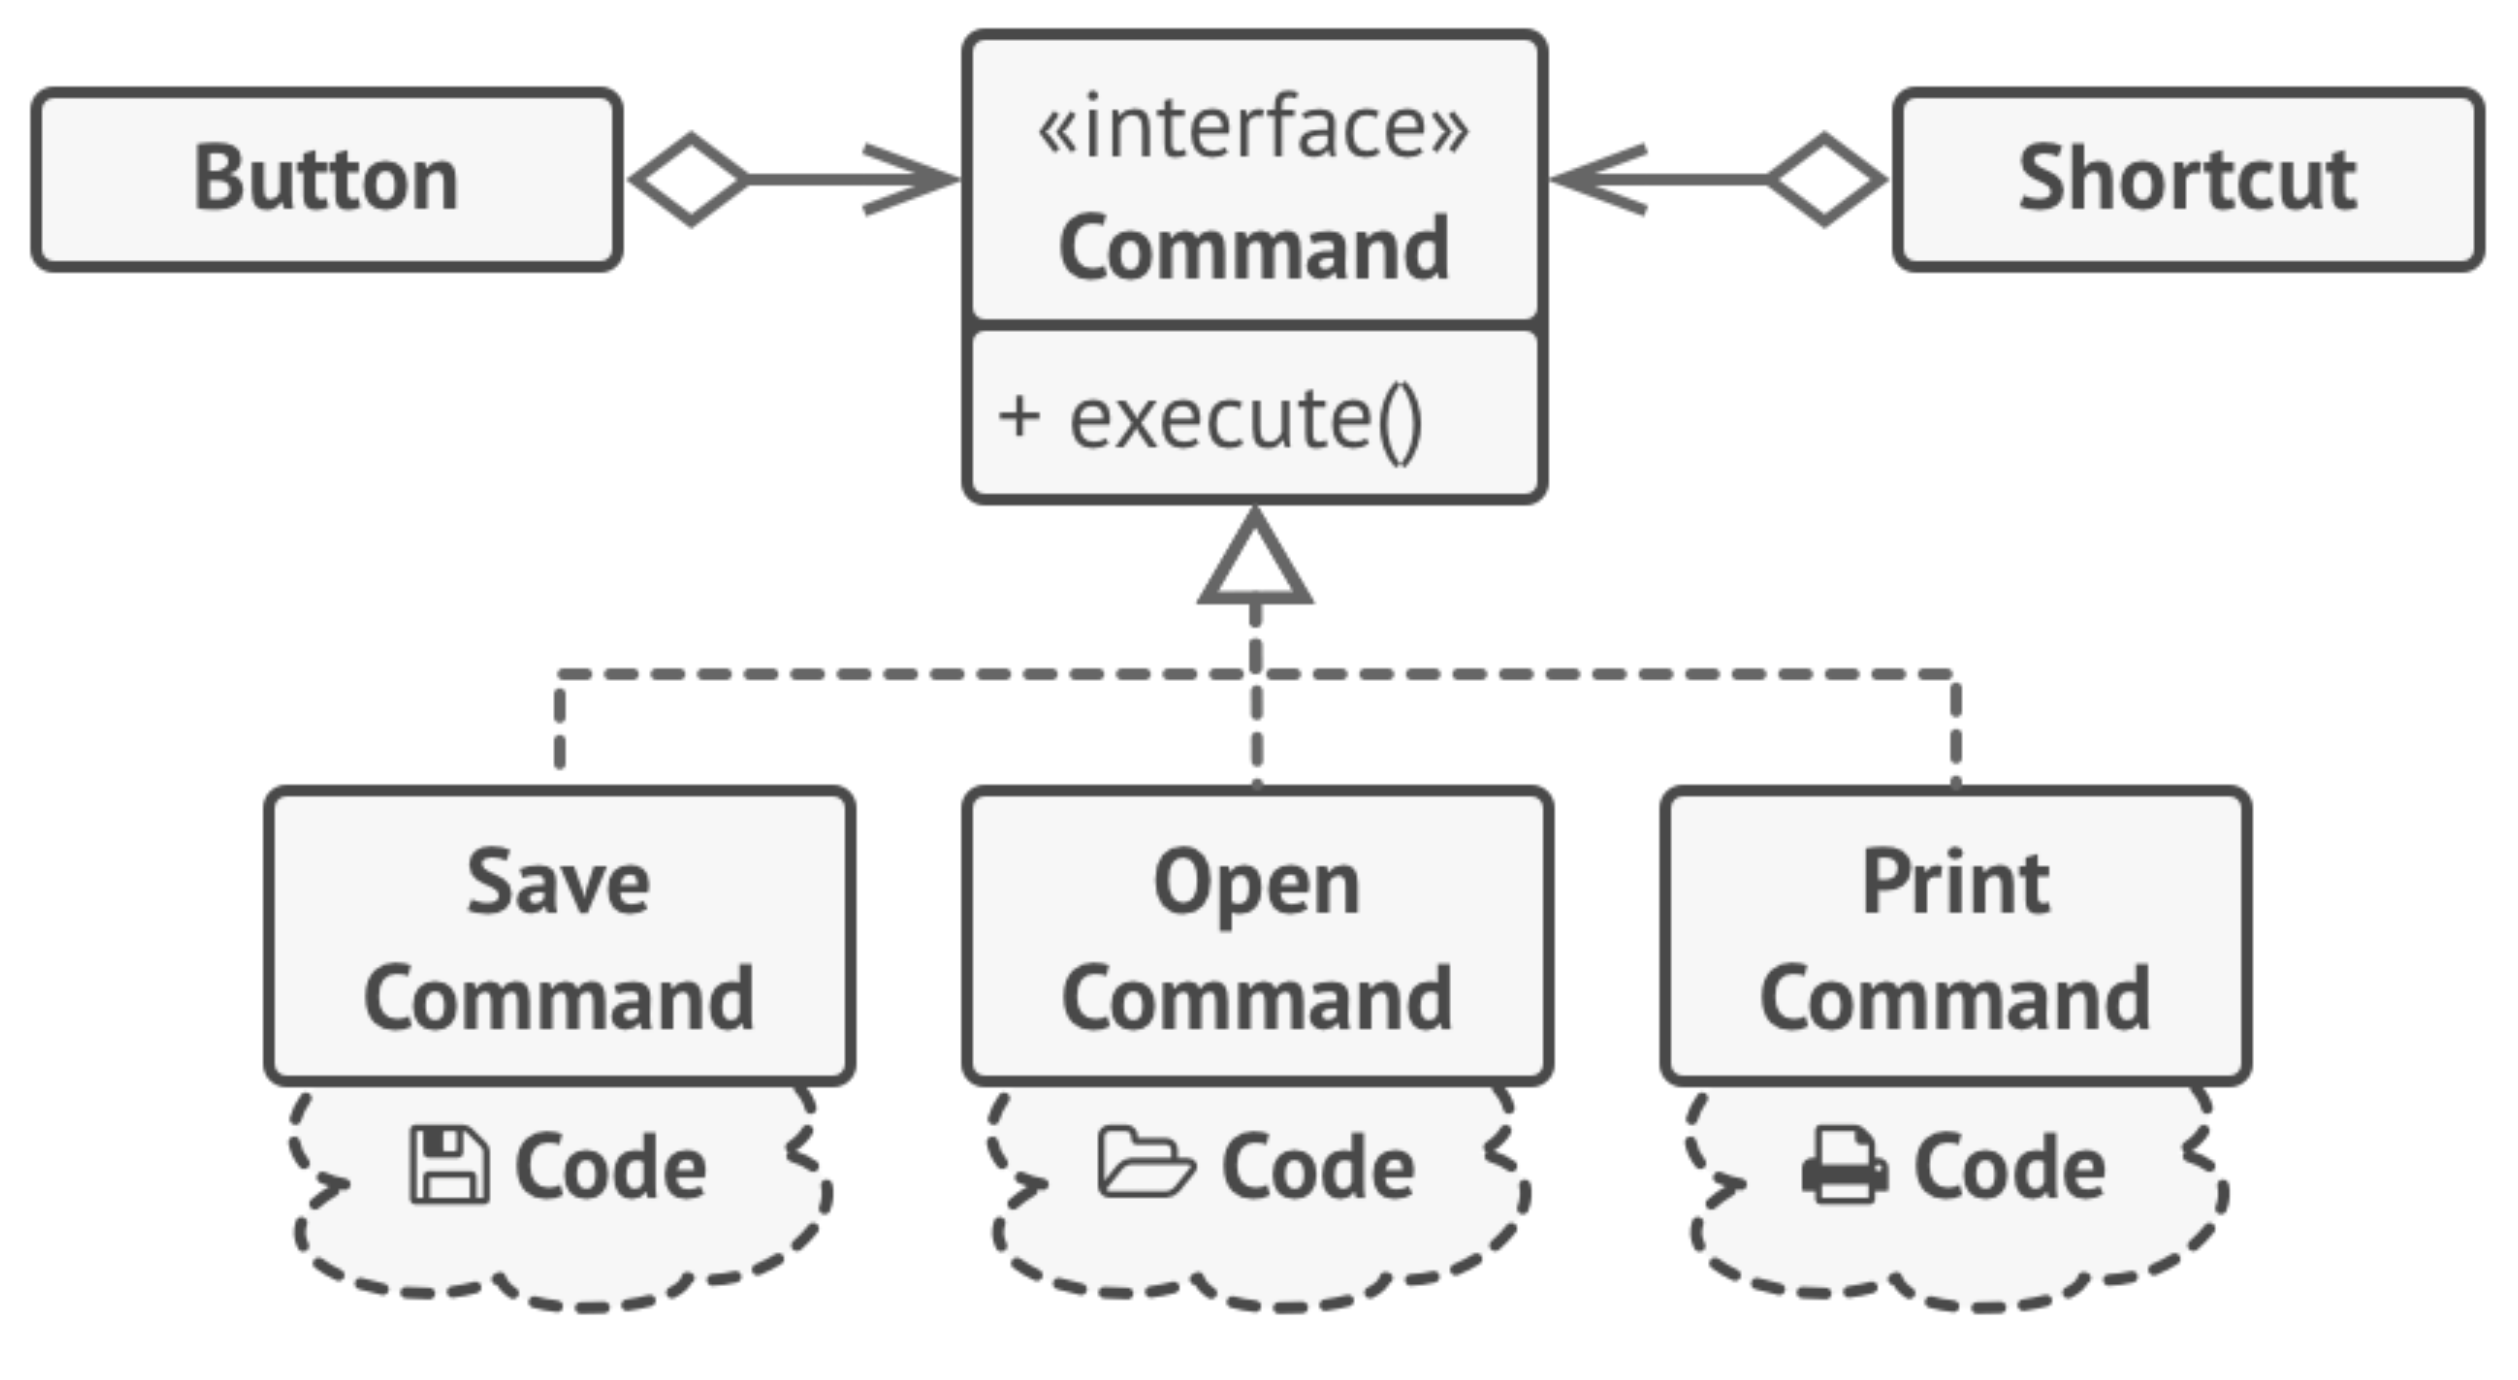 Command pattern implementation